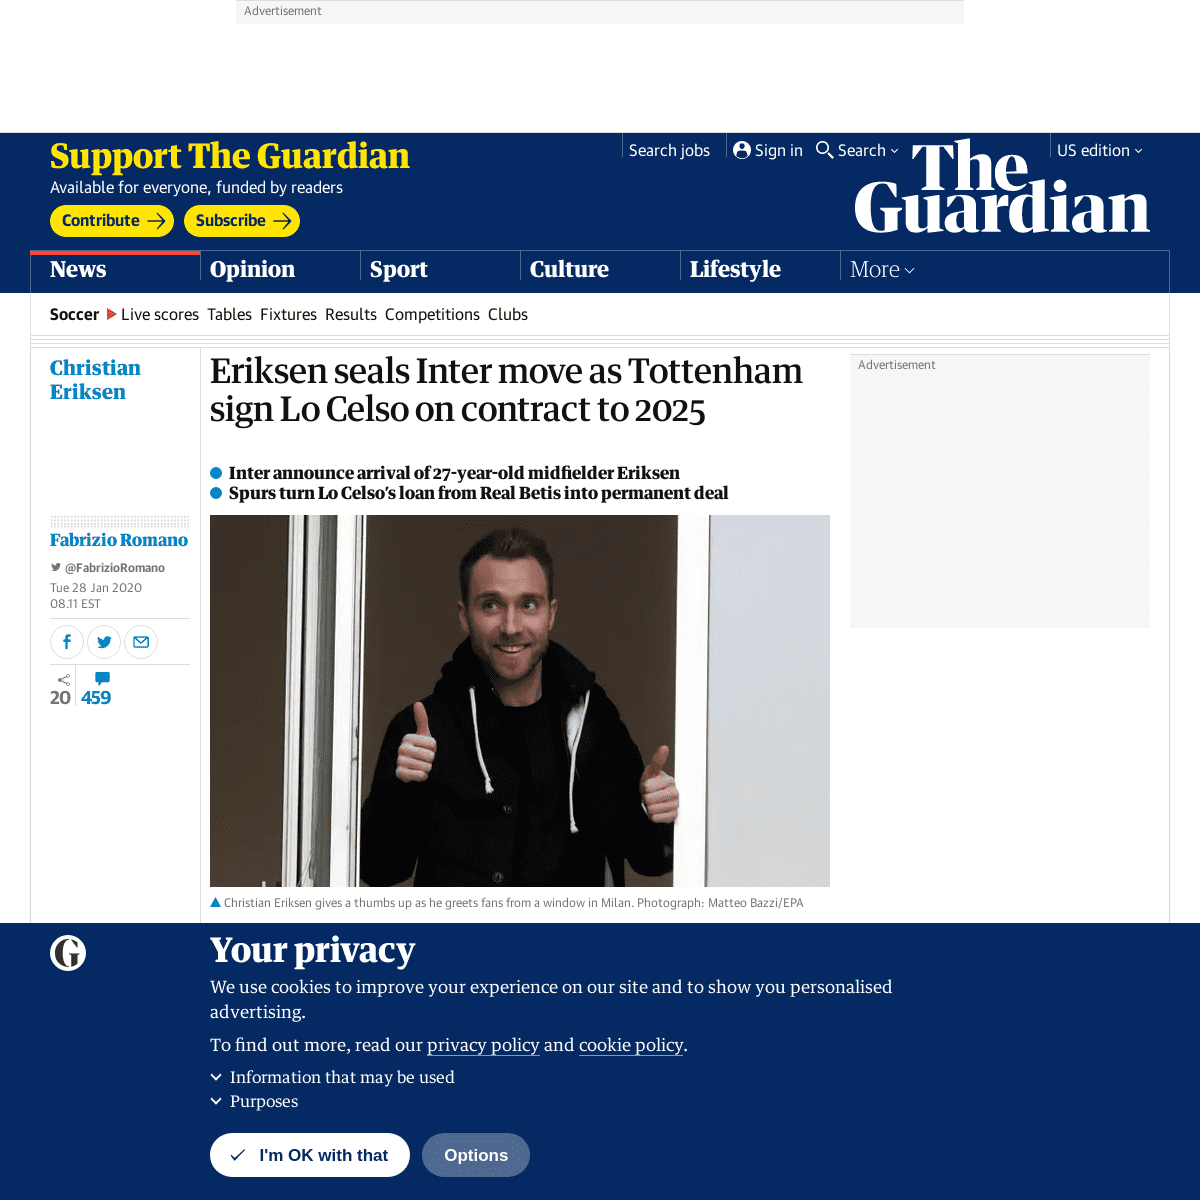 A complete backup of www.theguardian.com/football/2020/jan/28/christian-eriksen-completes-move-from-tottenham-to-internazionale-